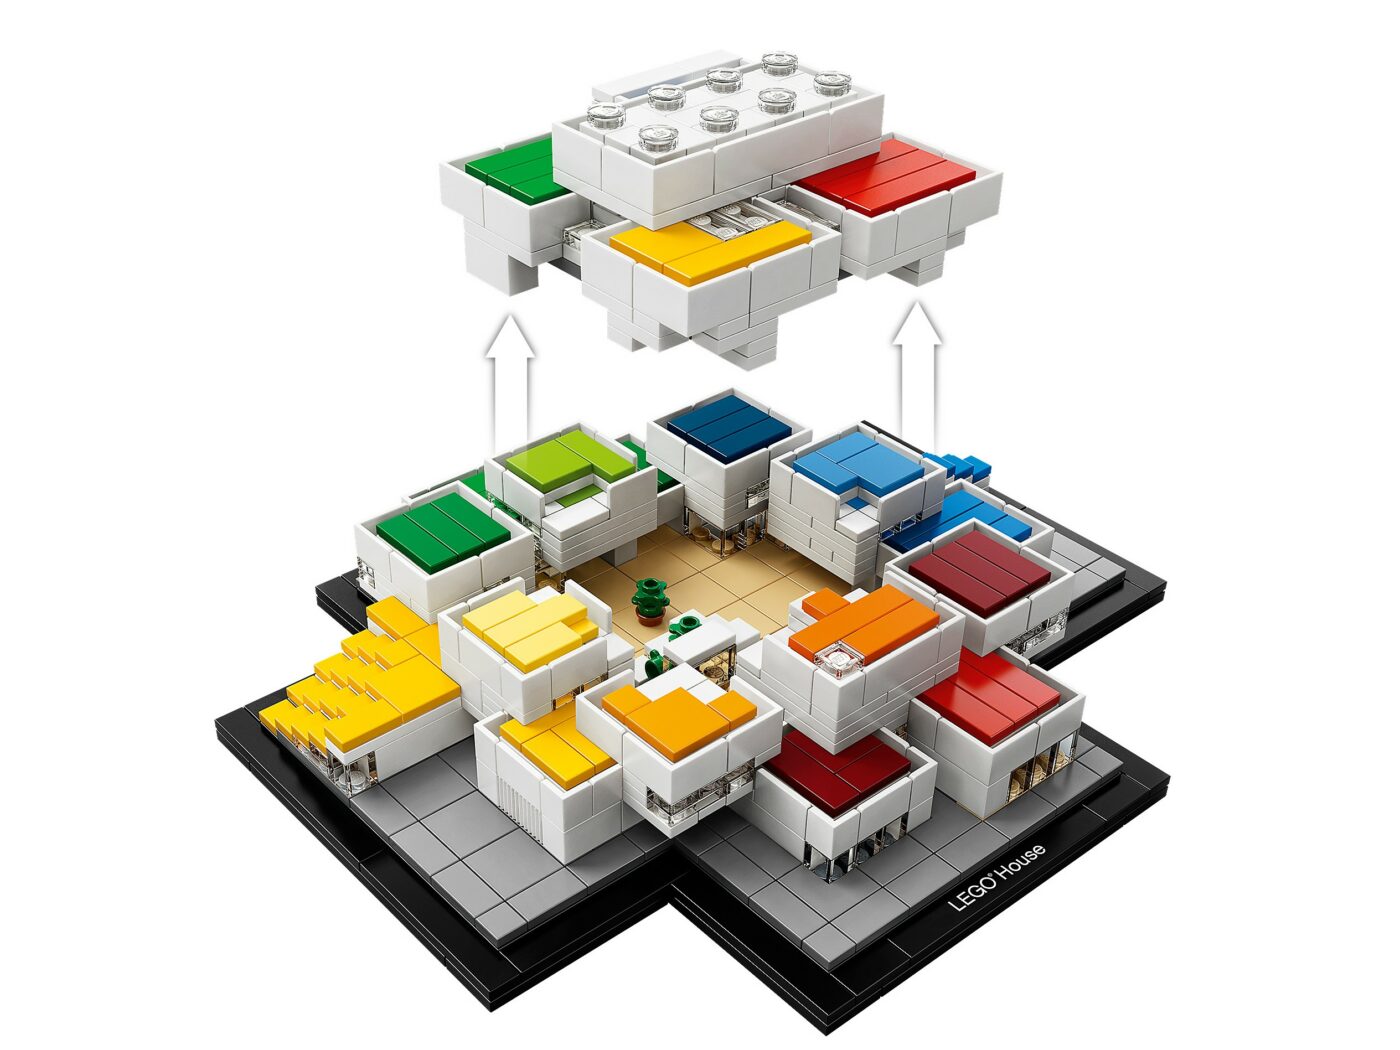 A LEGO House-exclusive set (21037) appears online to celebrate the